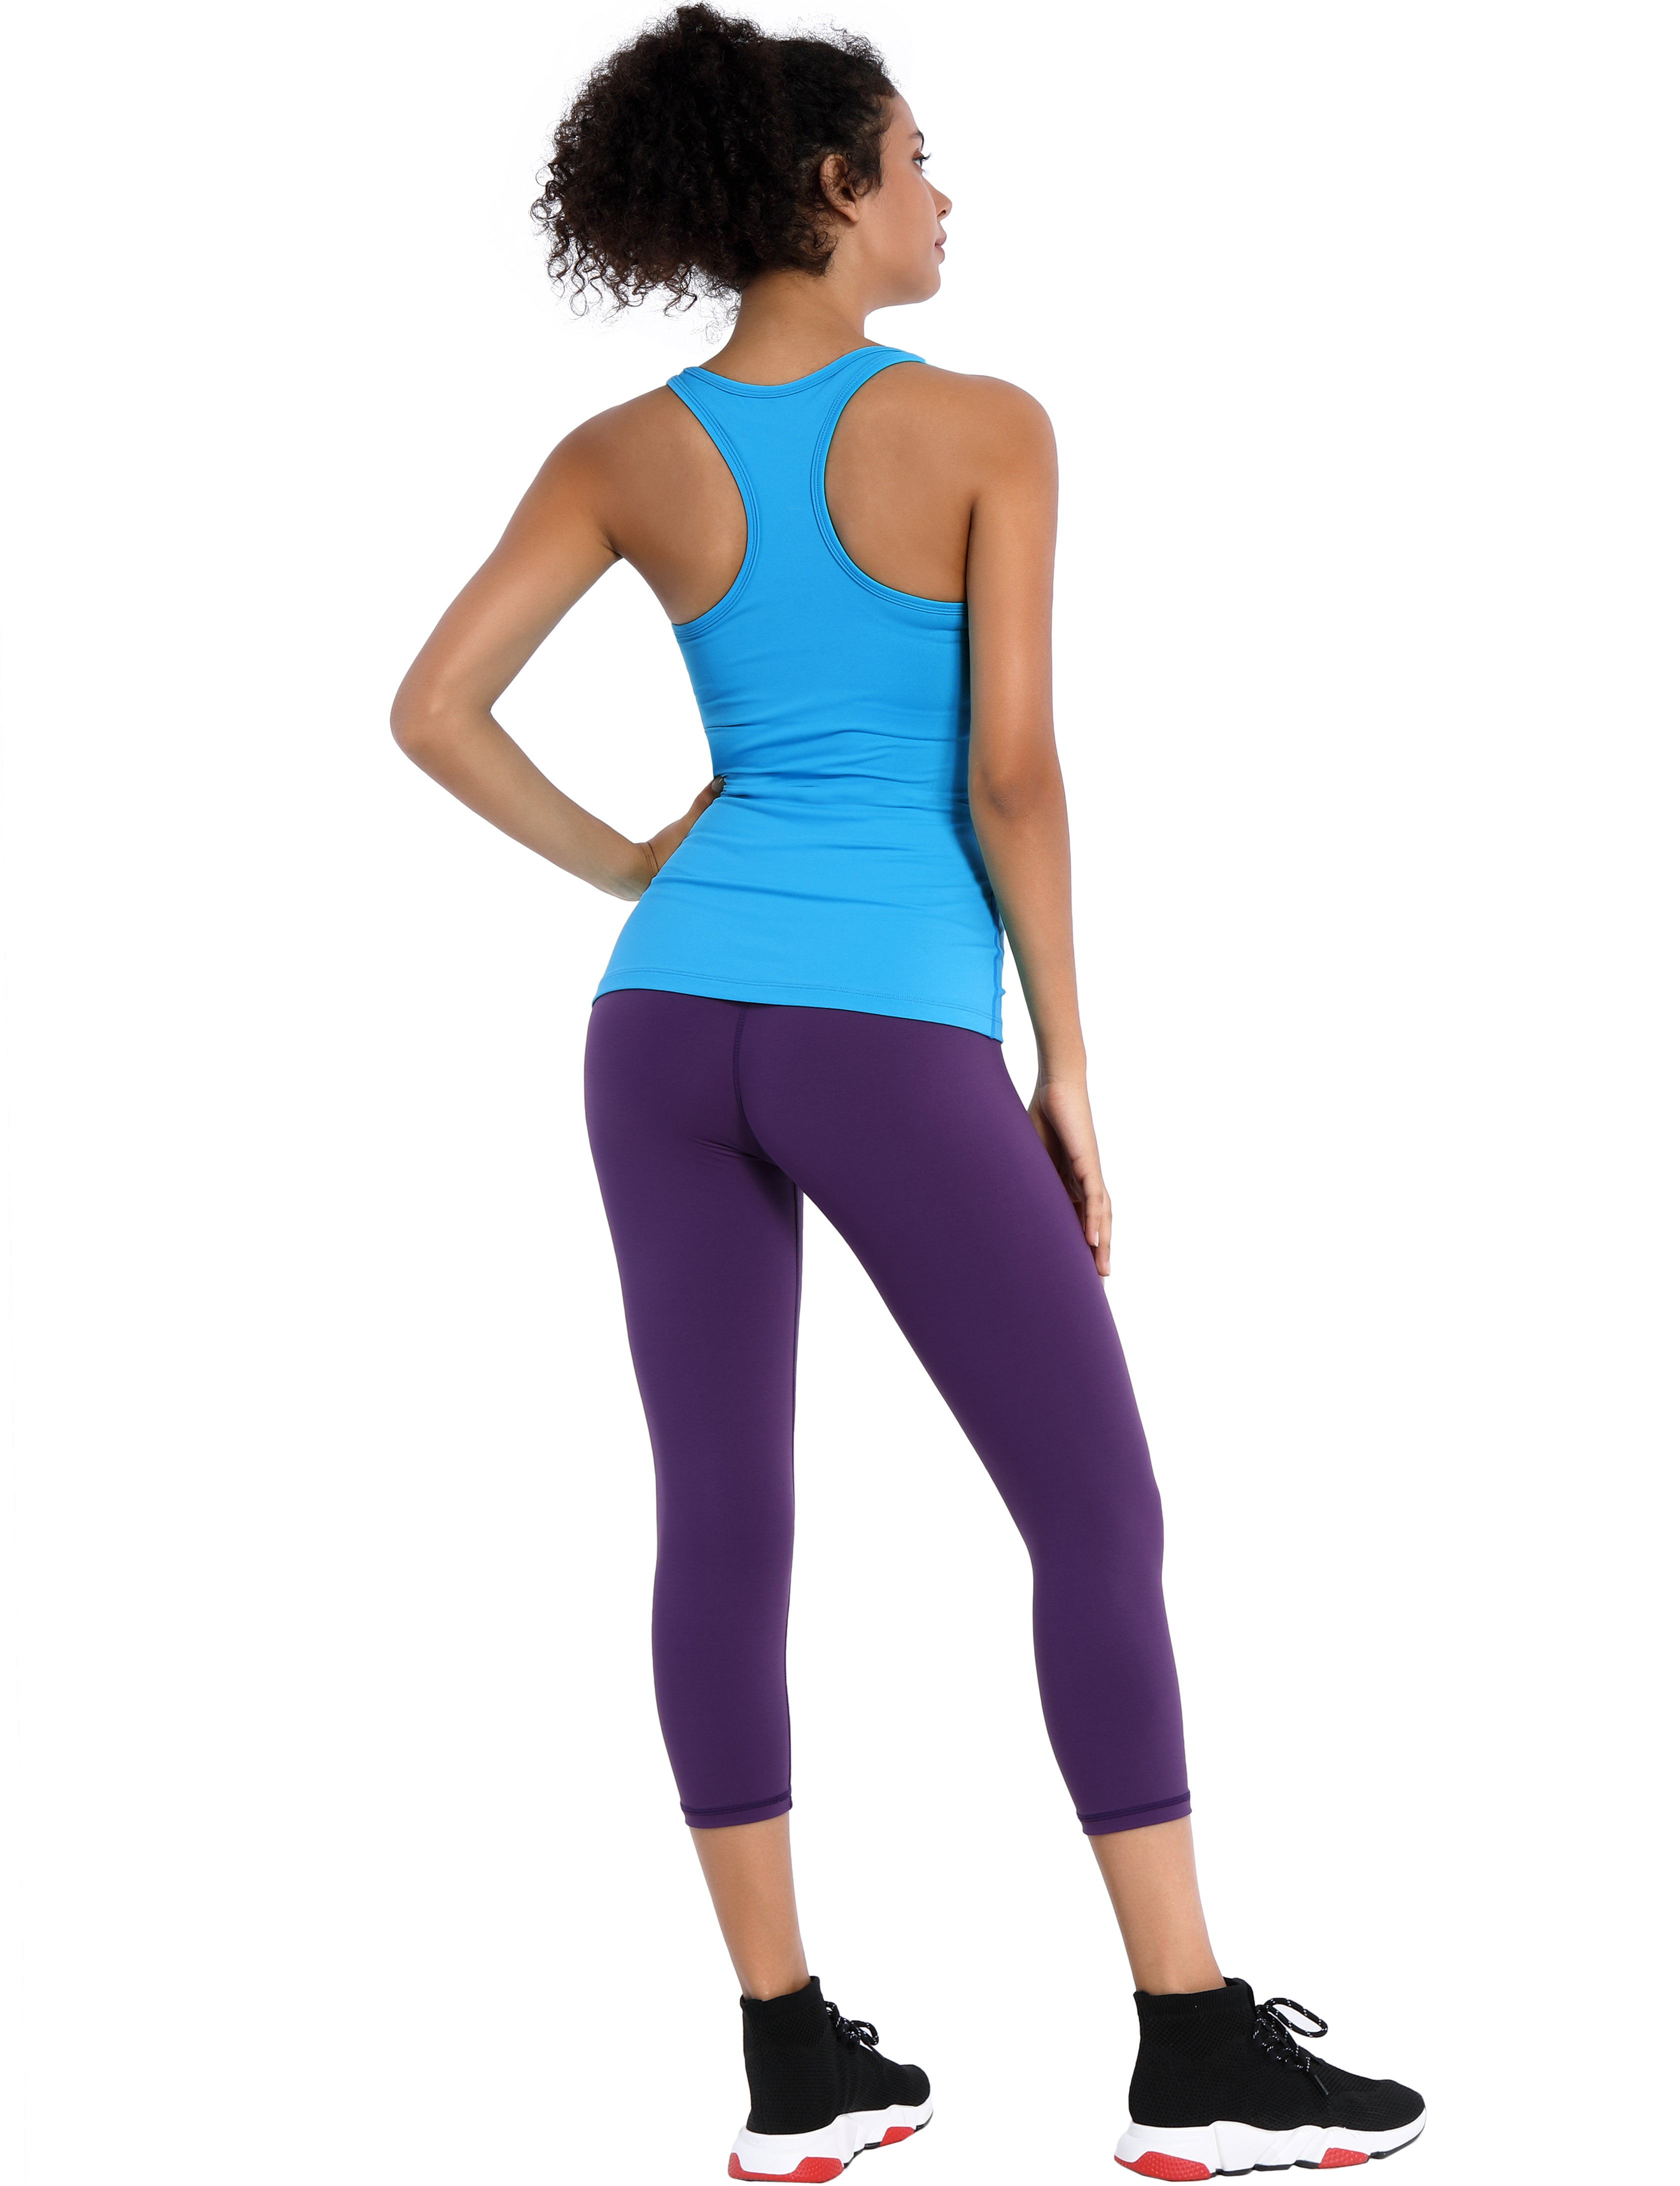 Racerback Athletic Tank Tops electricblue 92%Nylon/8%Spandex(Cotton Soft) Designed for Tall Size Tight Fit So buttery soft, it feels weightless Sweat-wicking Four-way stretch Breathable Contours your body Sits below the waistband for moderate, everyday coverage